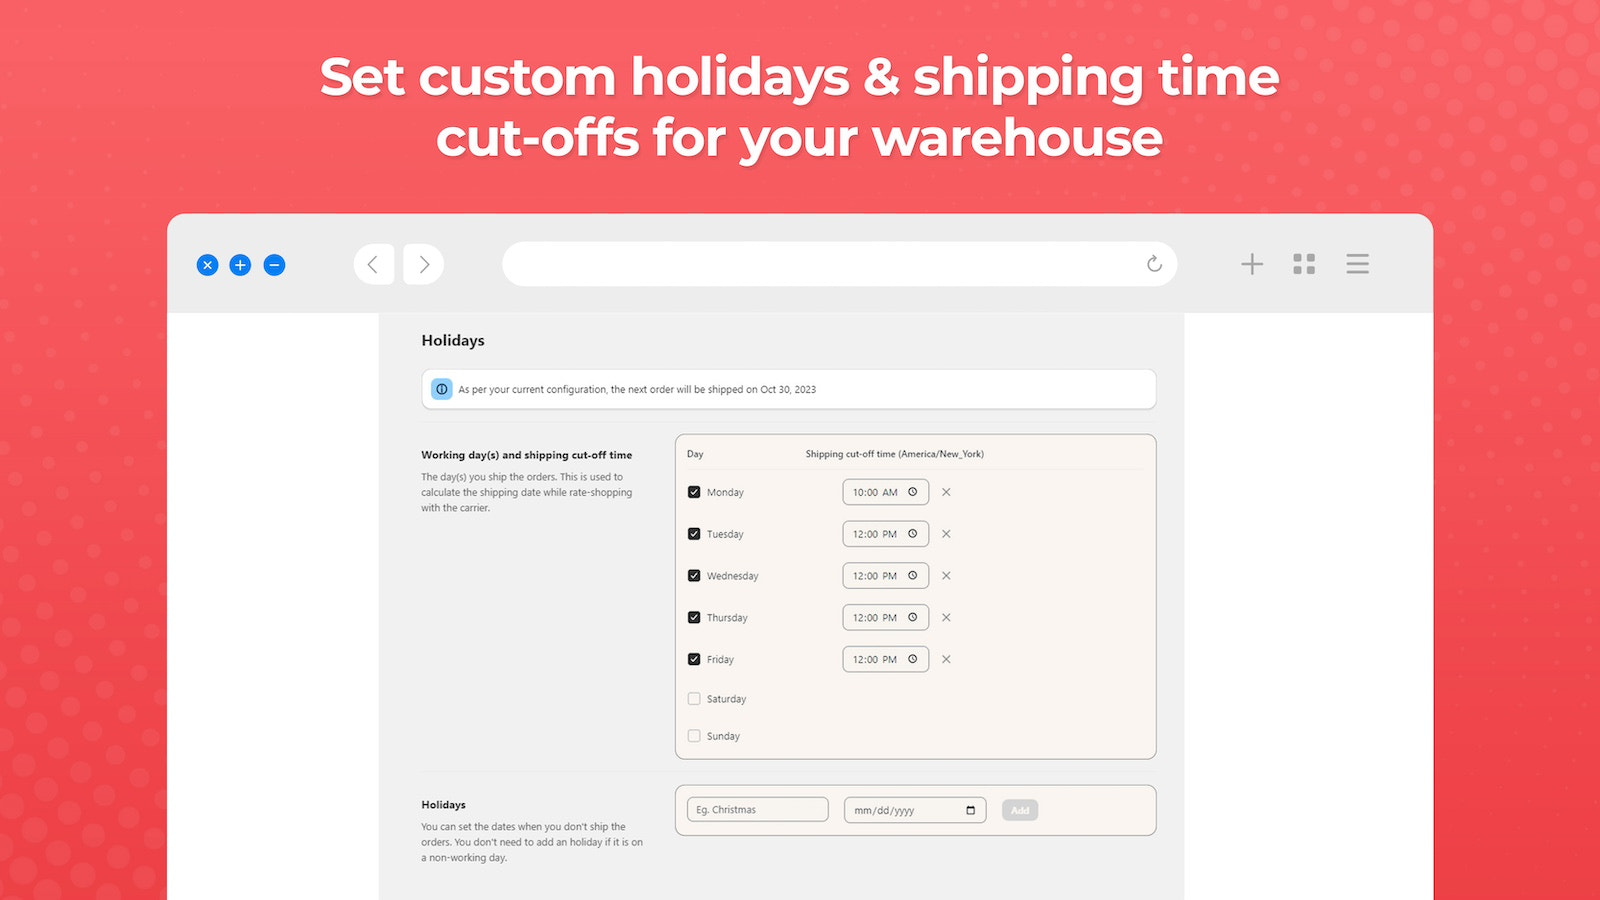 Set custom holidays & shipping time cut-offs for your warehouse